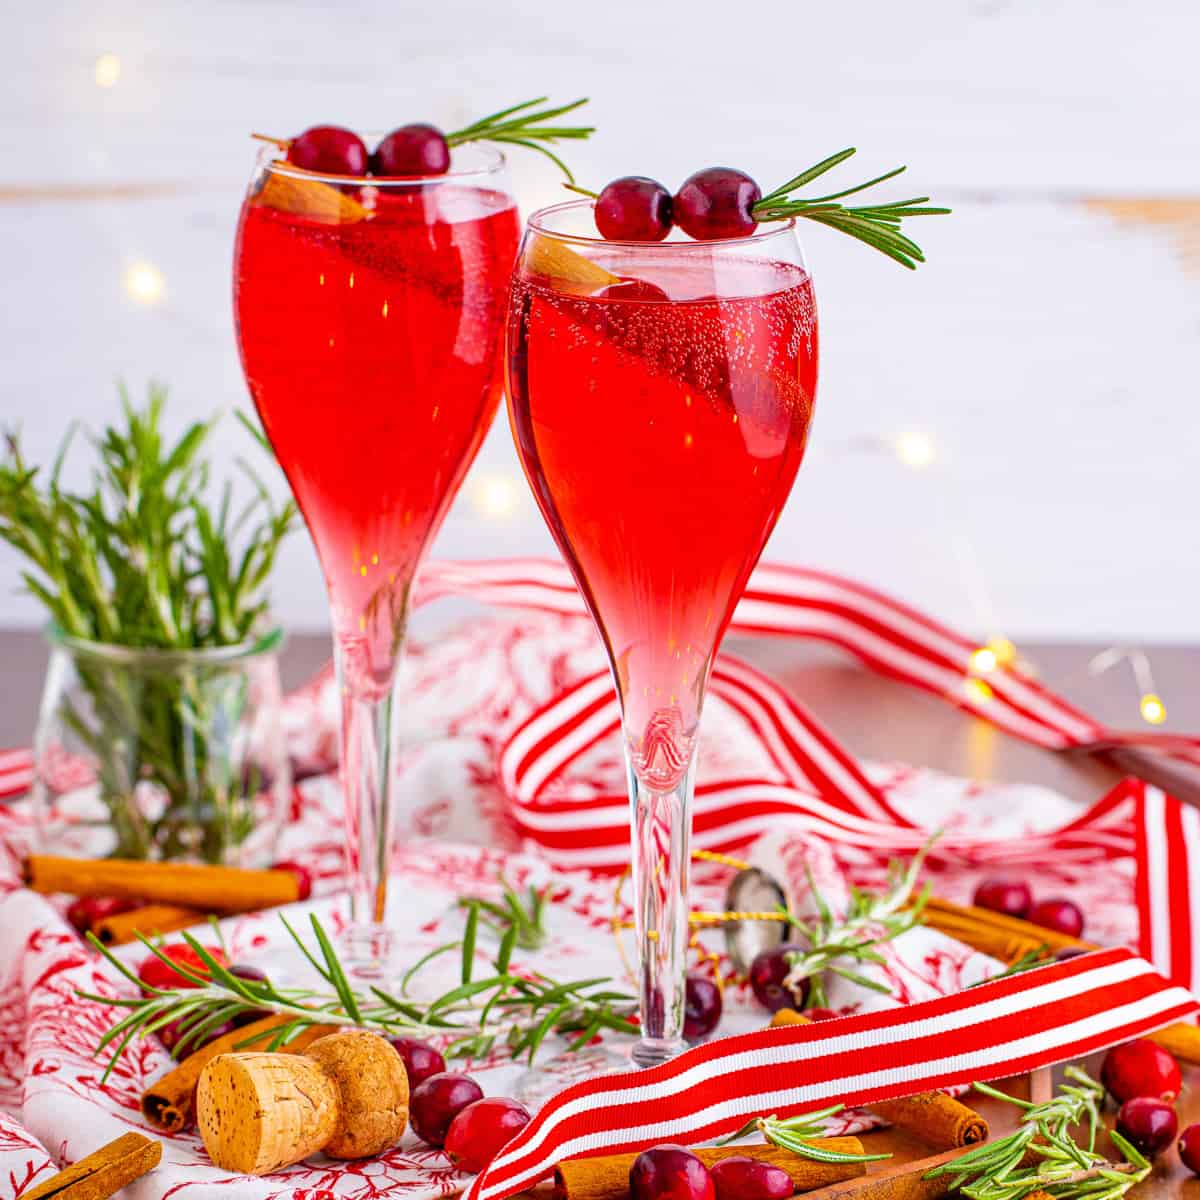 Set Up a Mimosa Bar for the Holidays + Sugared Cranberries Recipe